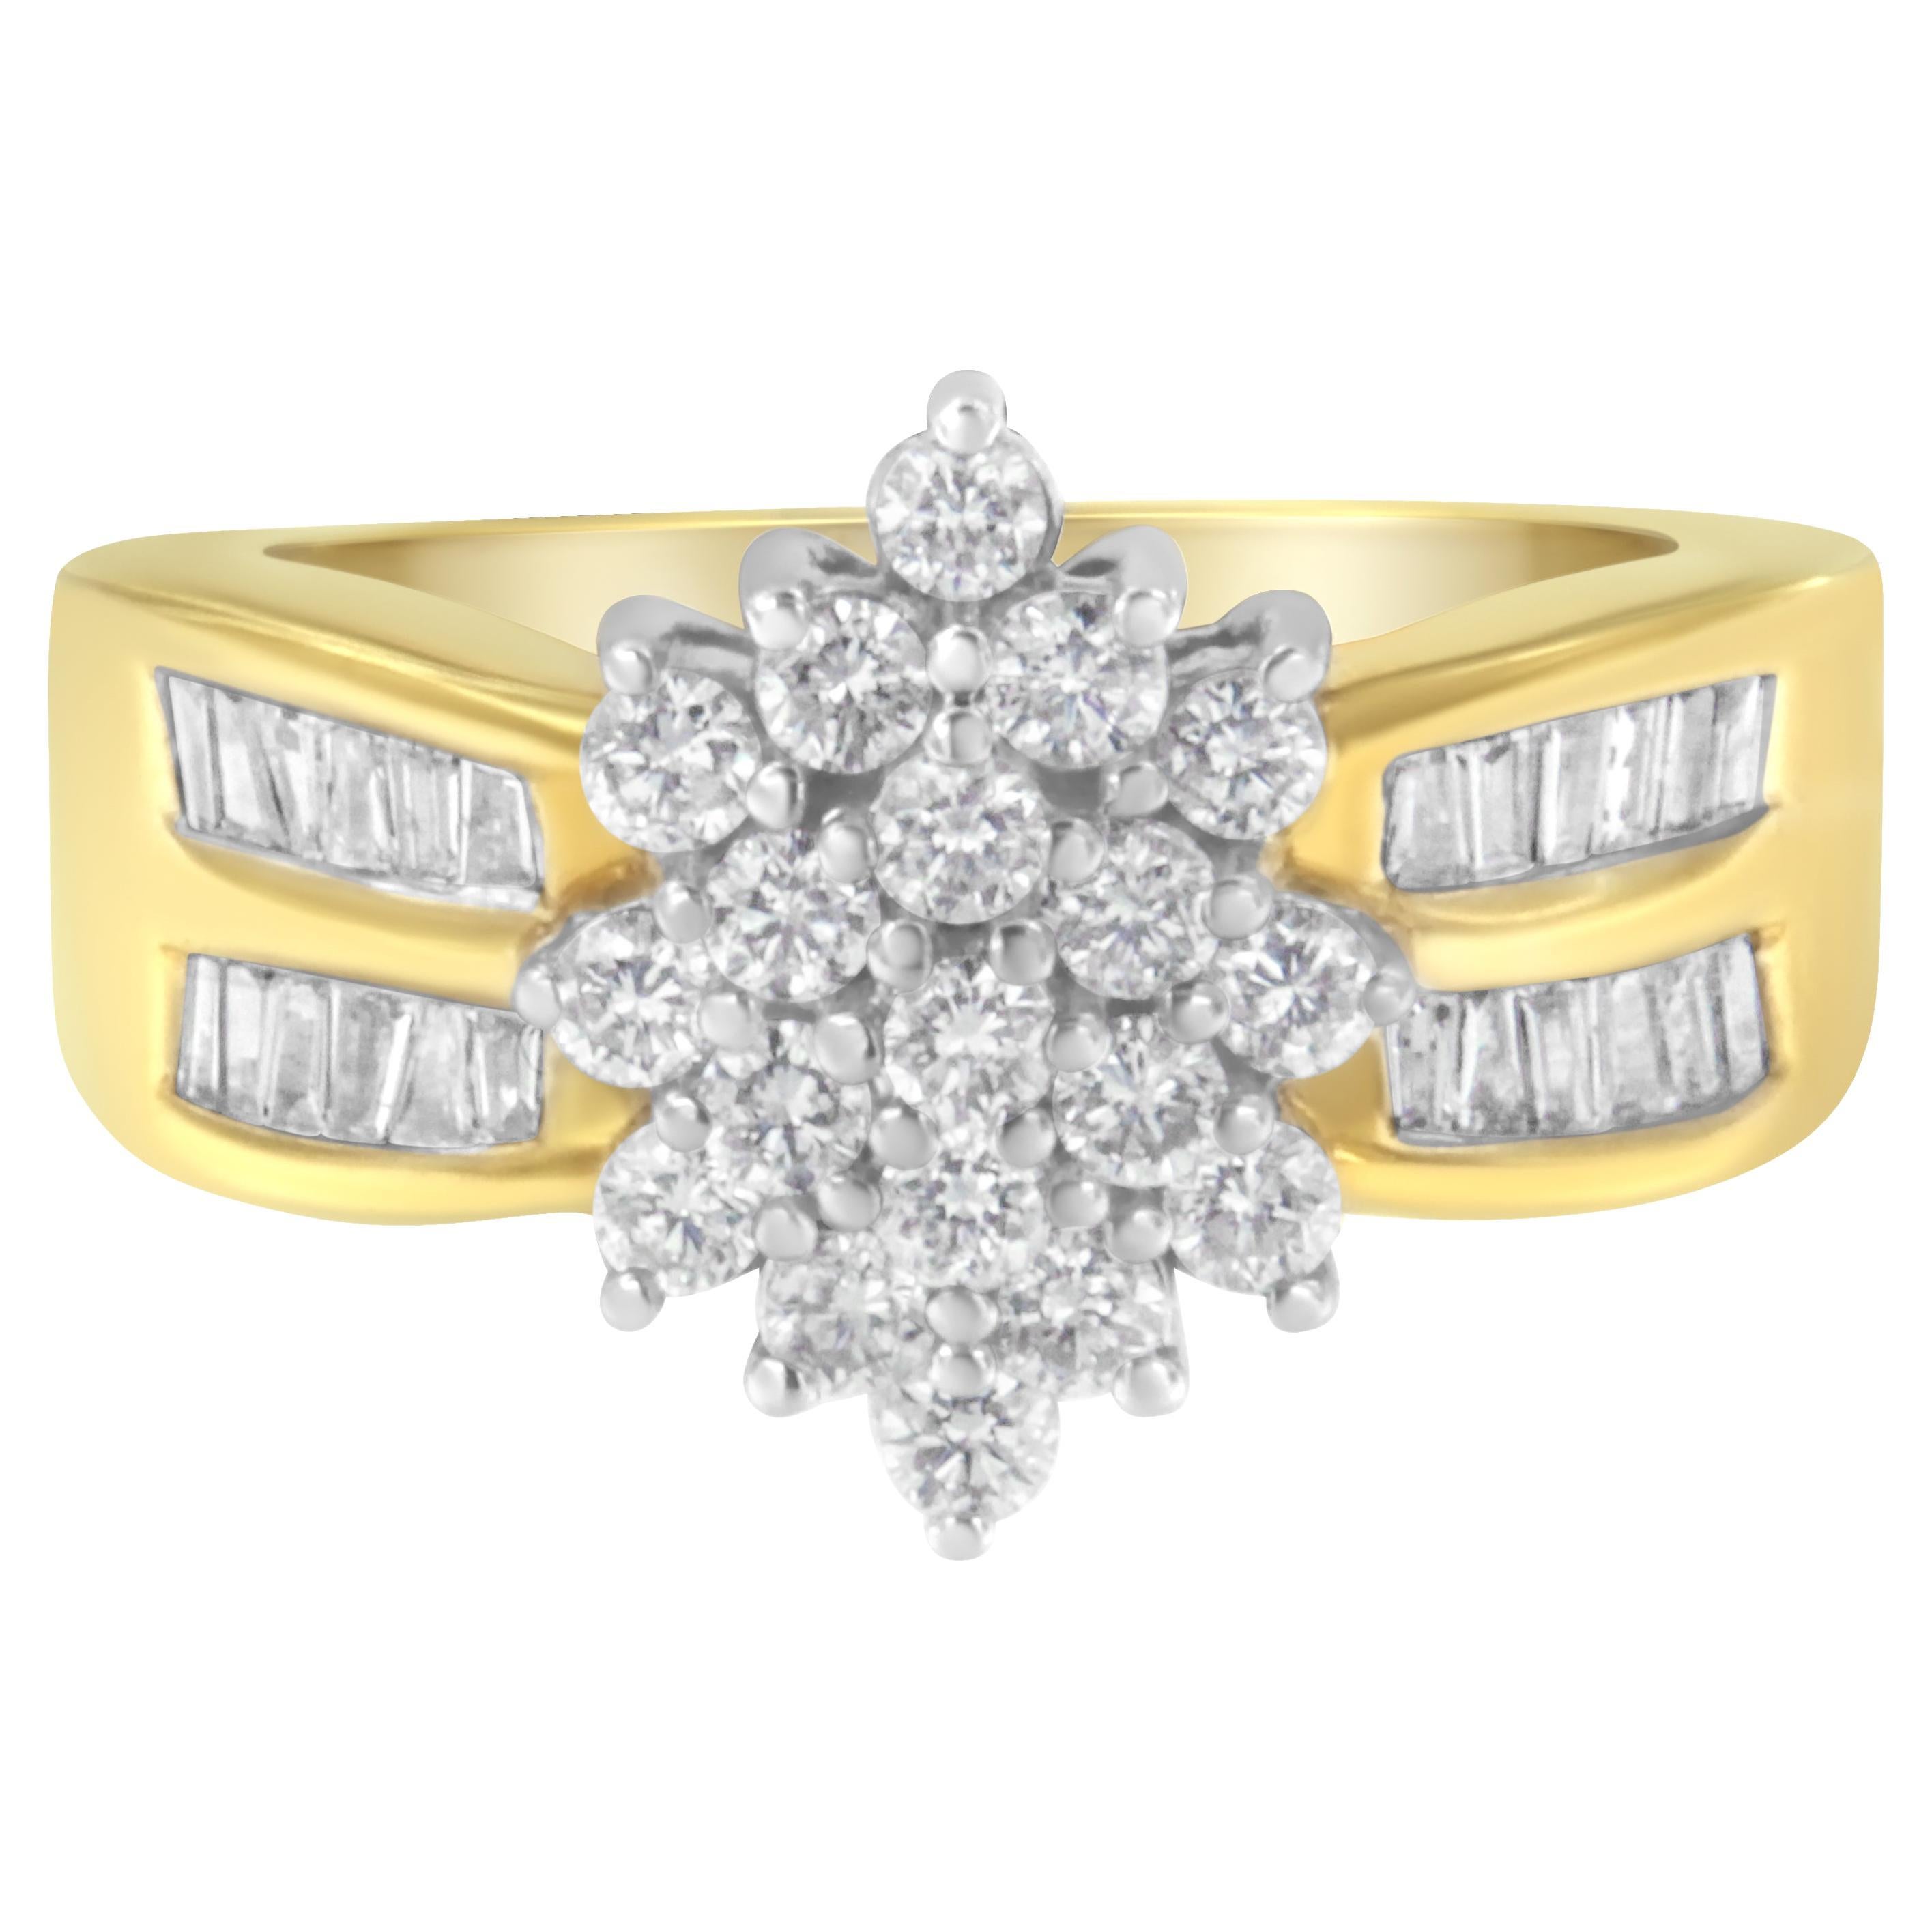 For Sale:  10K Yellow Gold 1.00 Carat Round and Baguette-Cut Diamond Floral Cluster Ring